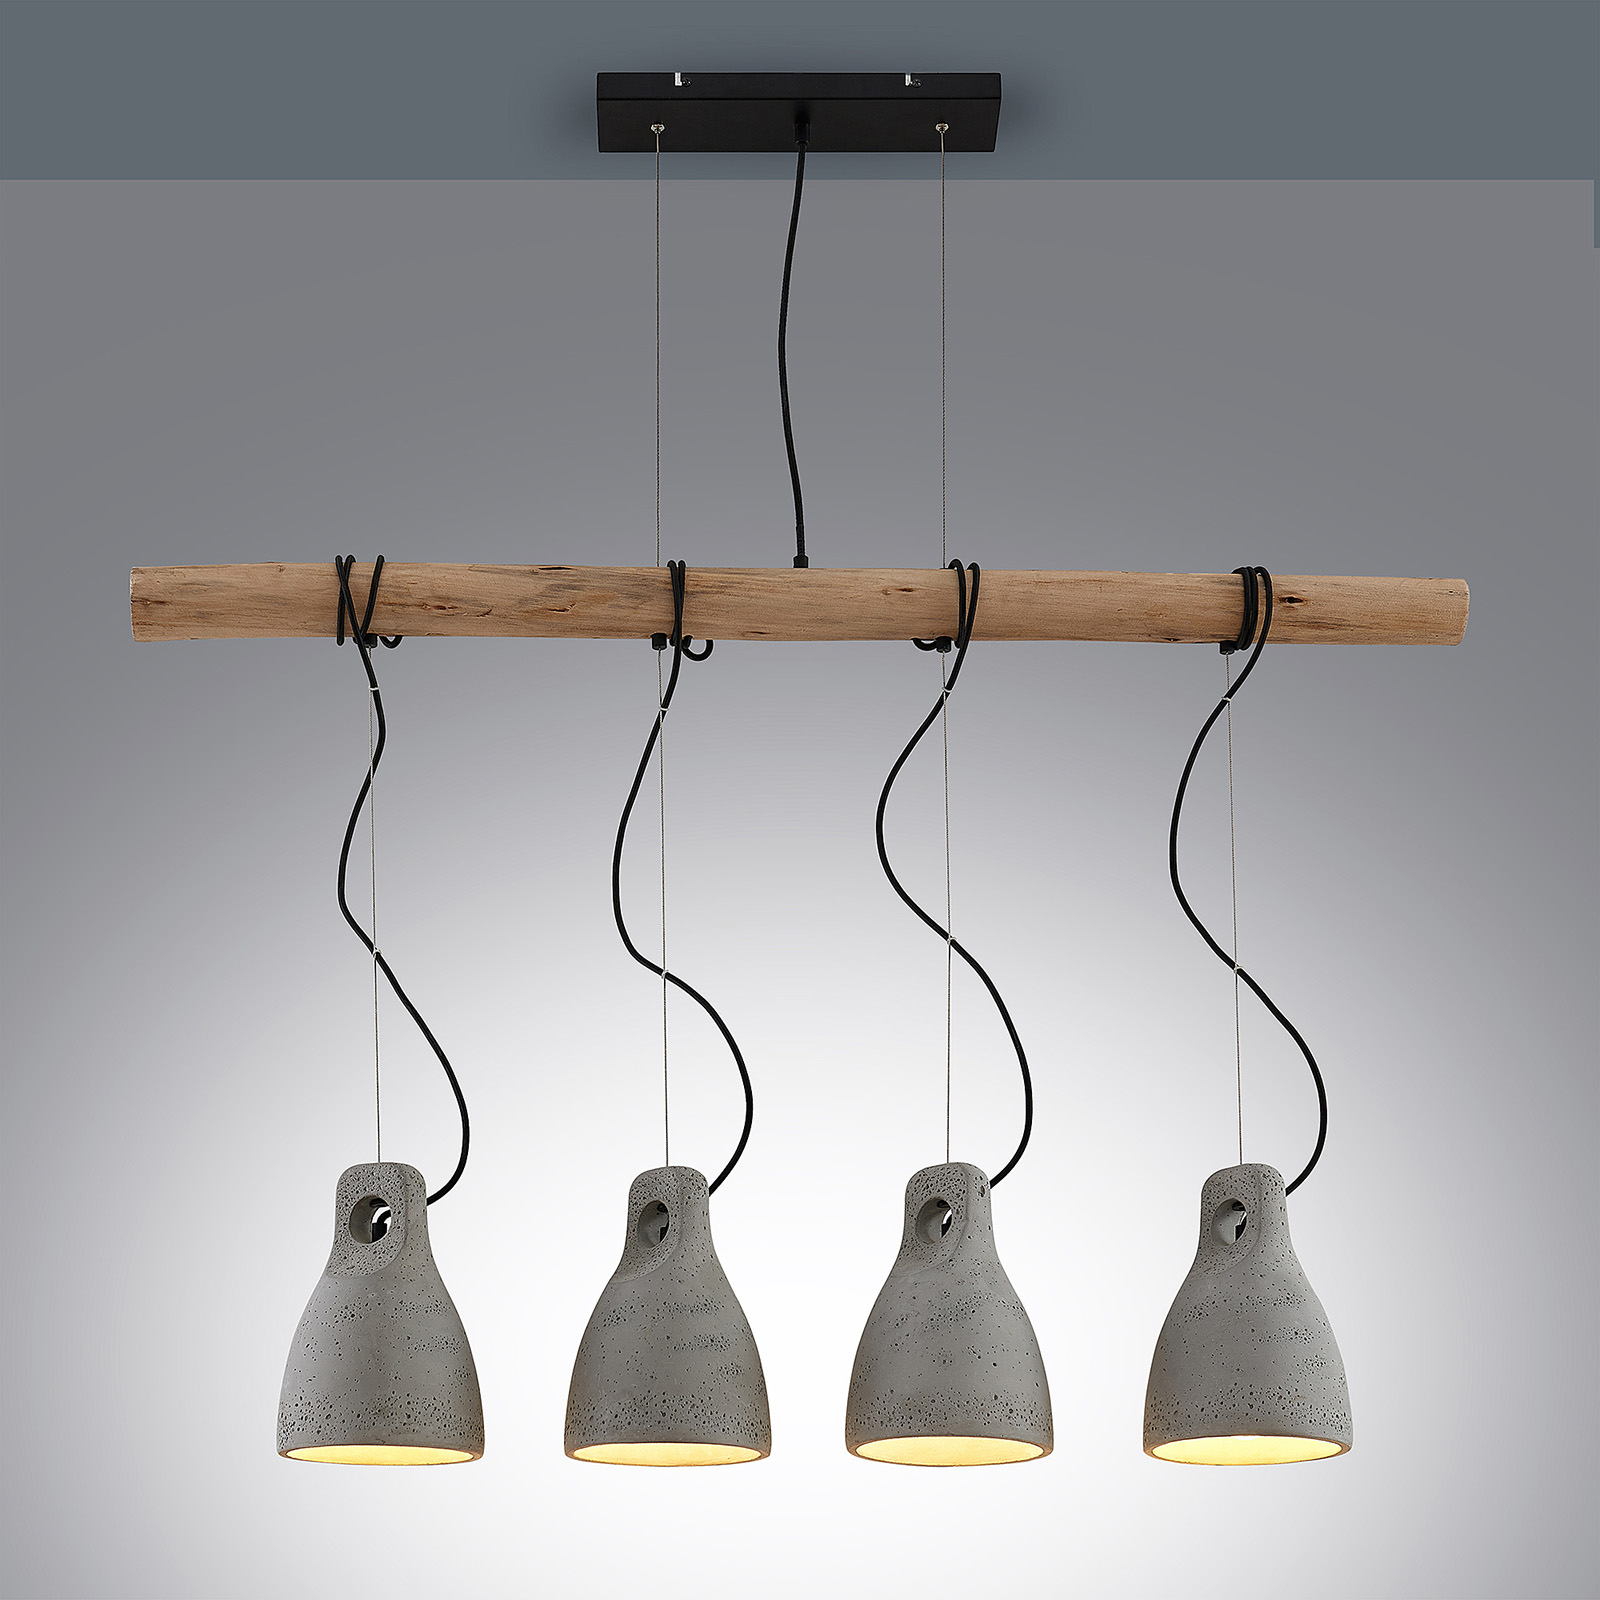 Lindby Grima hanging light made of concrete 4-bulb